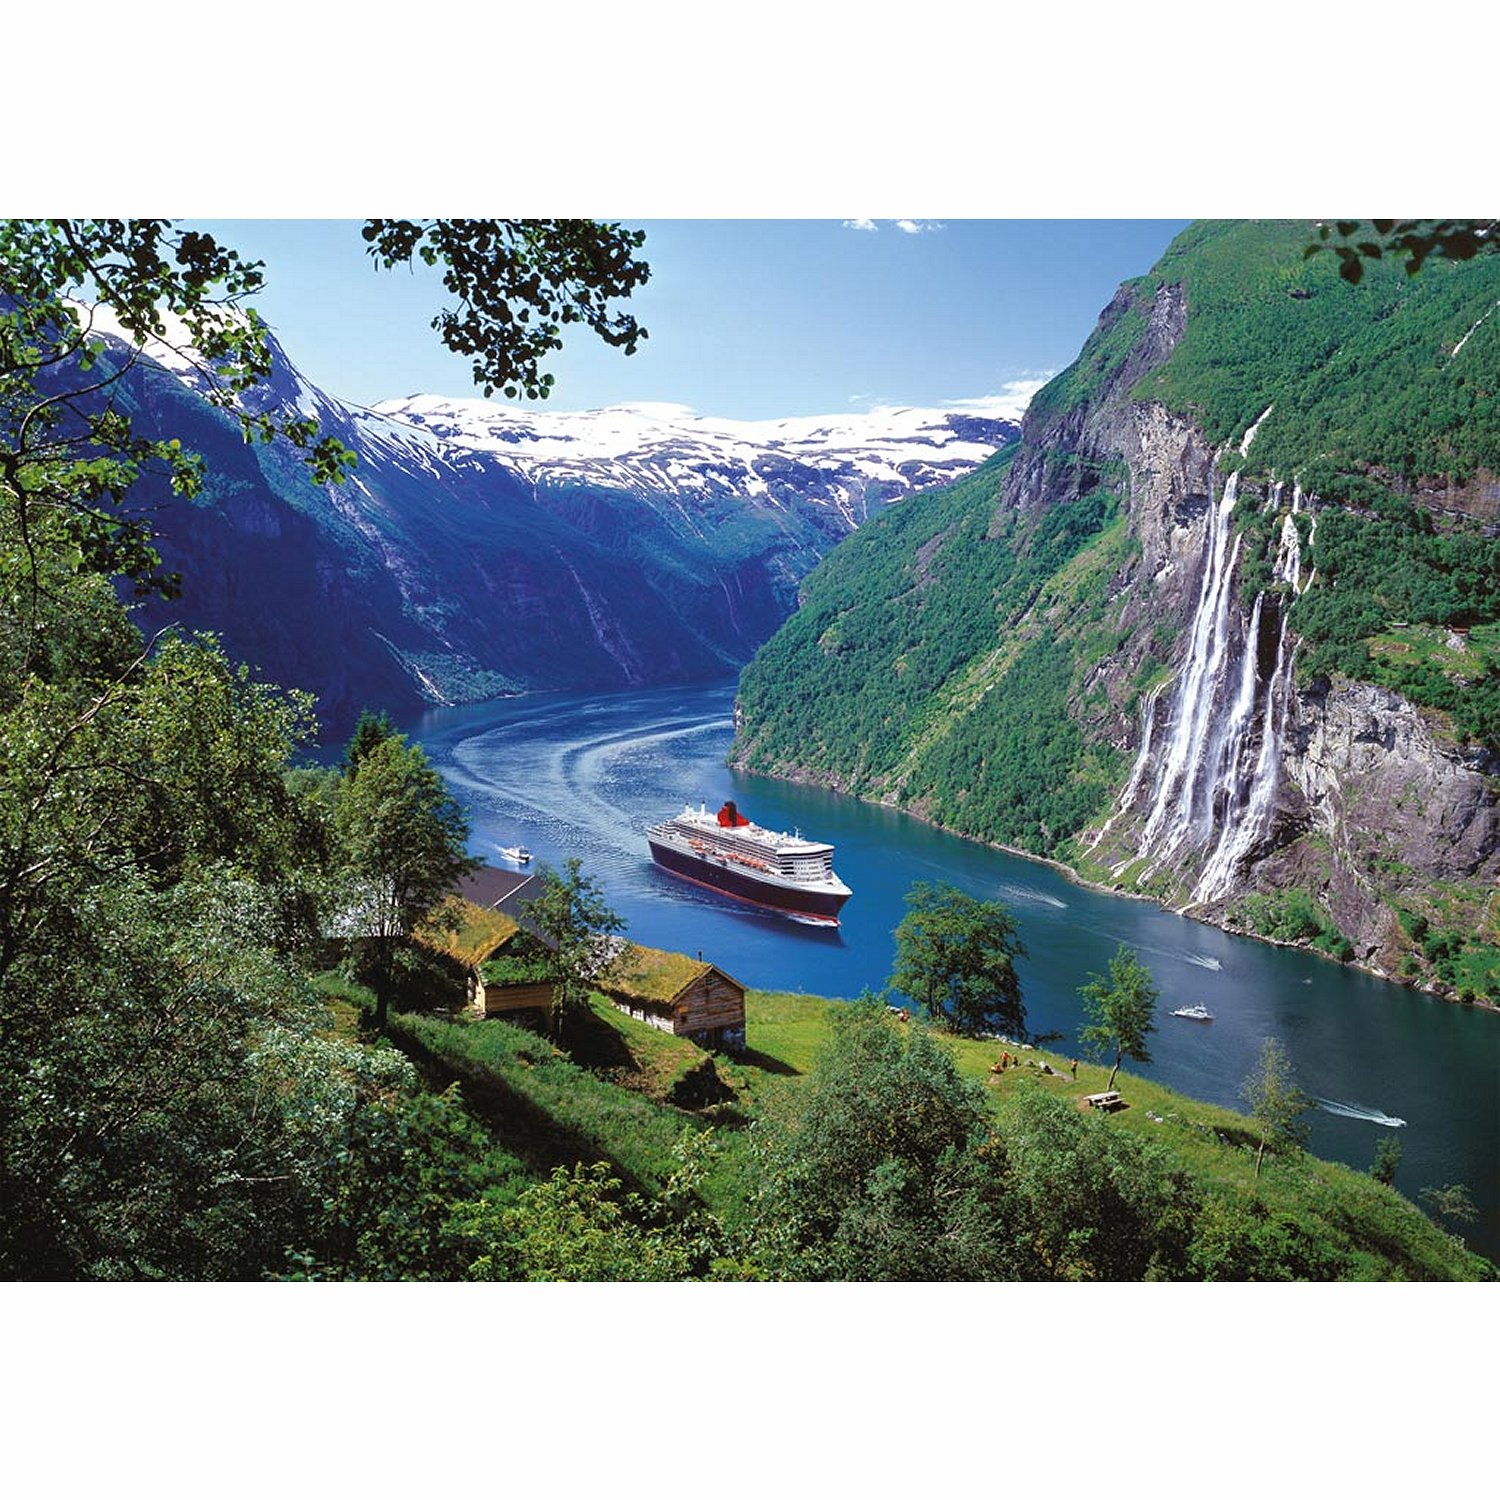  Jigsaw Puzzle - 1000 Pieces - Norway Fjord 1000 piece jigsaw puzzle